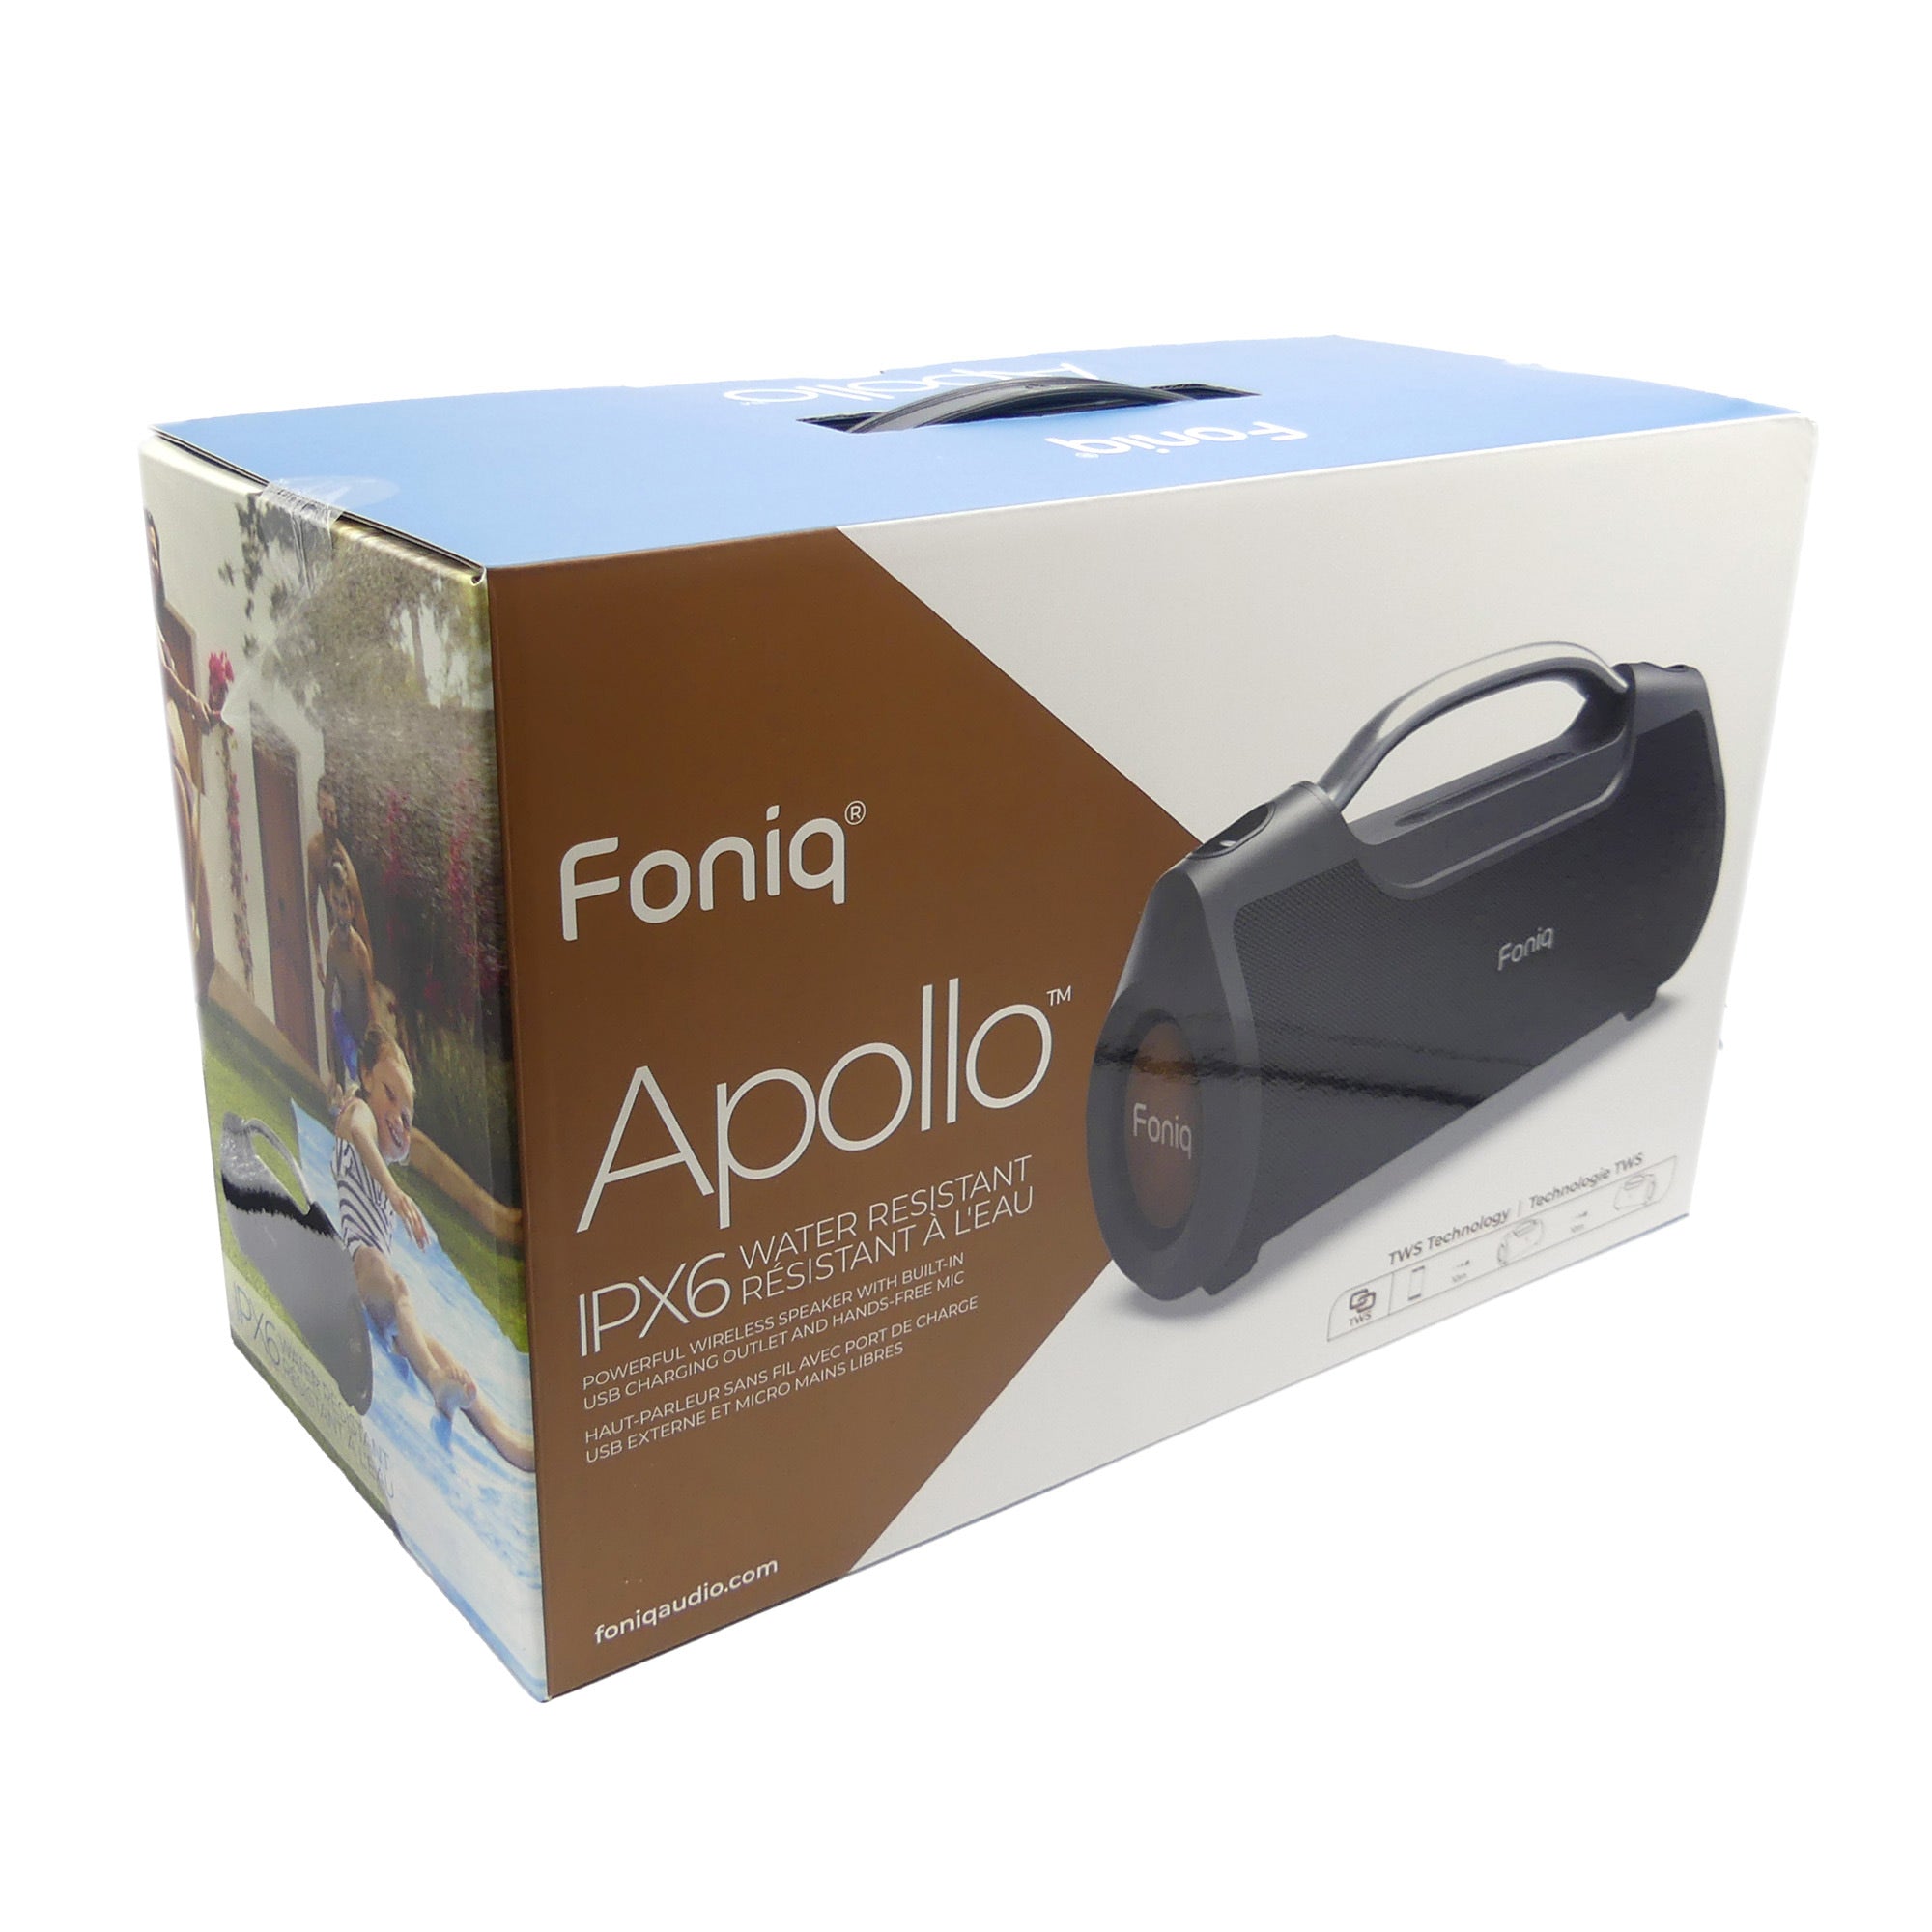 Foniq Apollo Portable TWS Bluetooth Speaker with Built-in Power Bank and USB/AUX Inputs - 15-09441